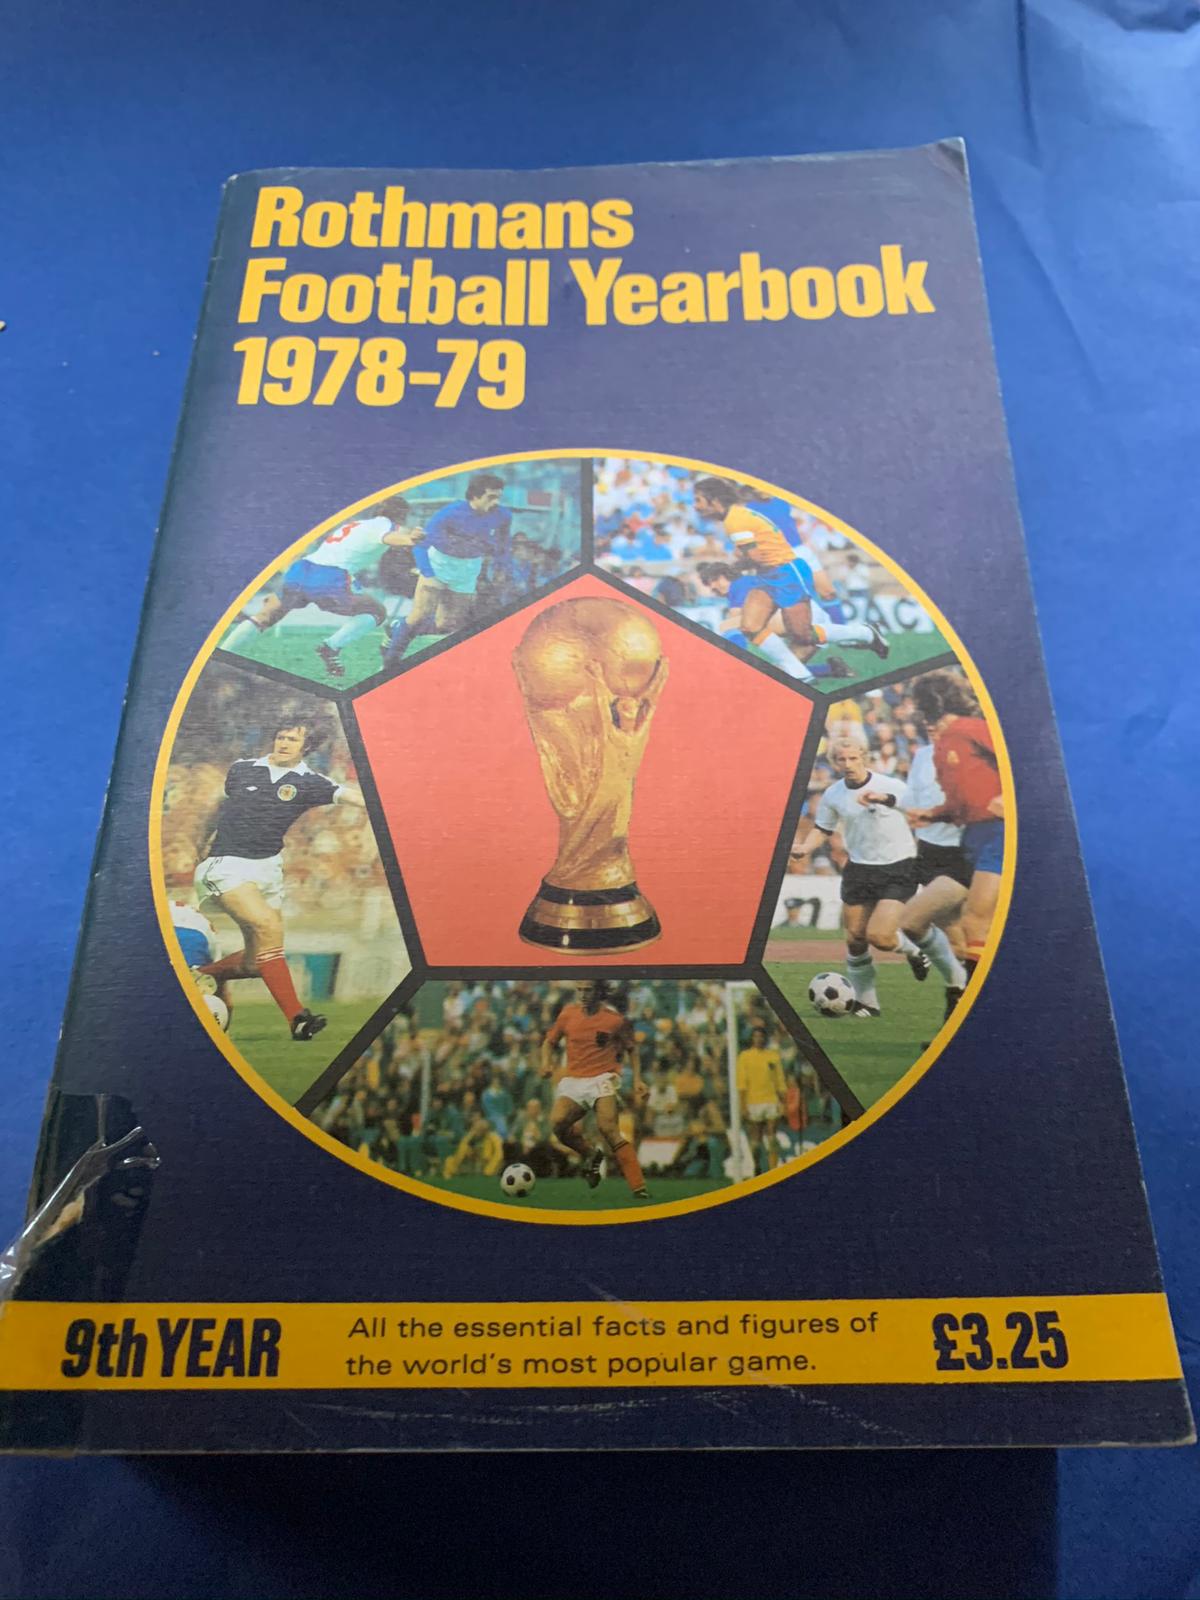 Rothmans Football Yearbook 1978-79